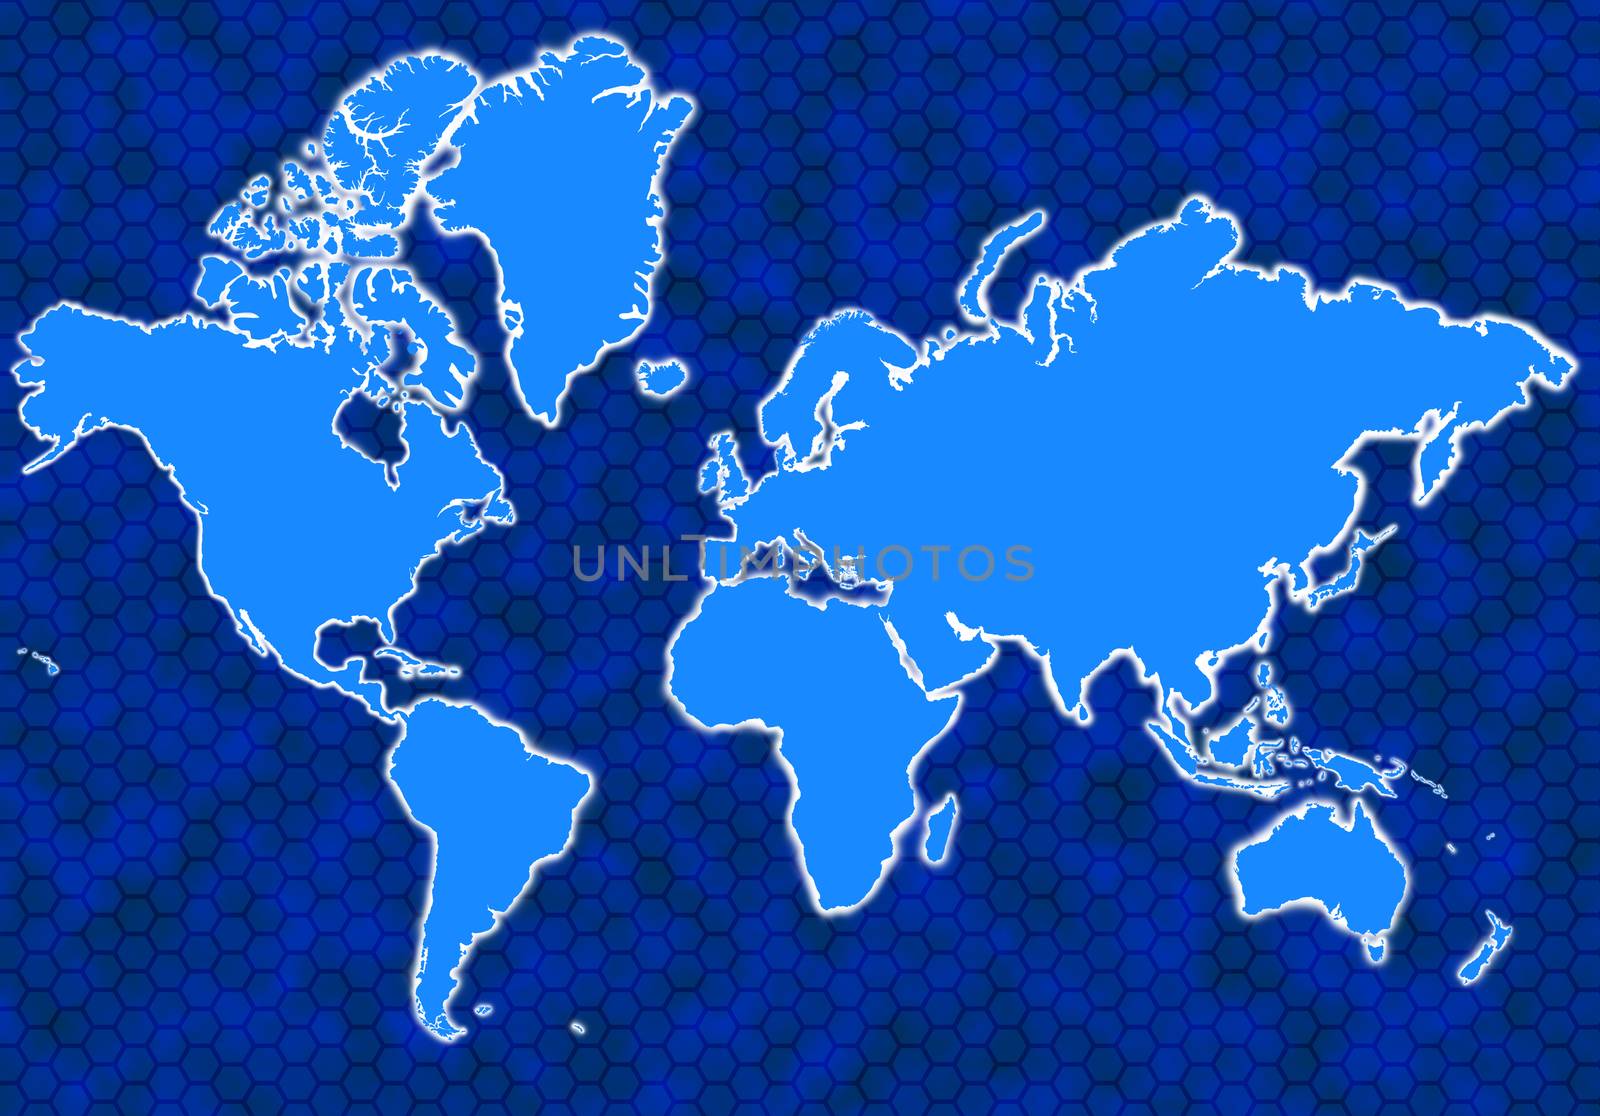 Blue global map with hexagons and glowing continents by Balefire9